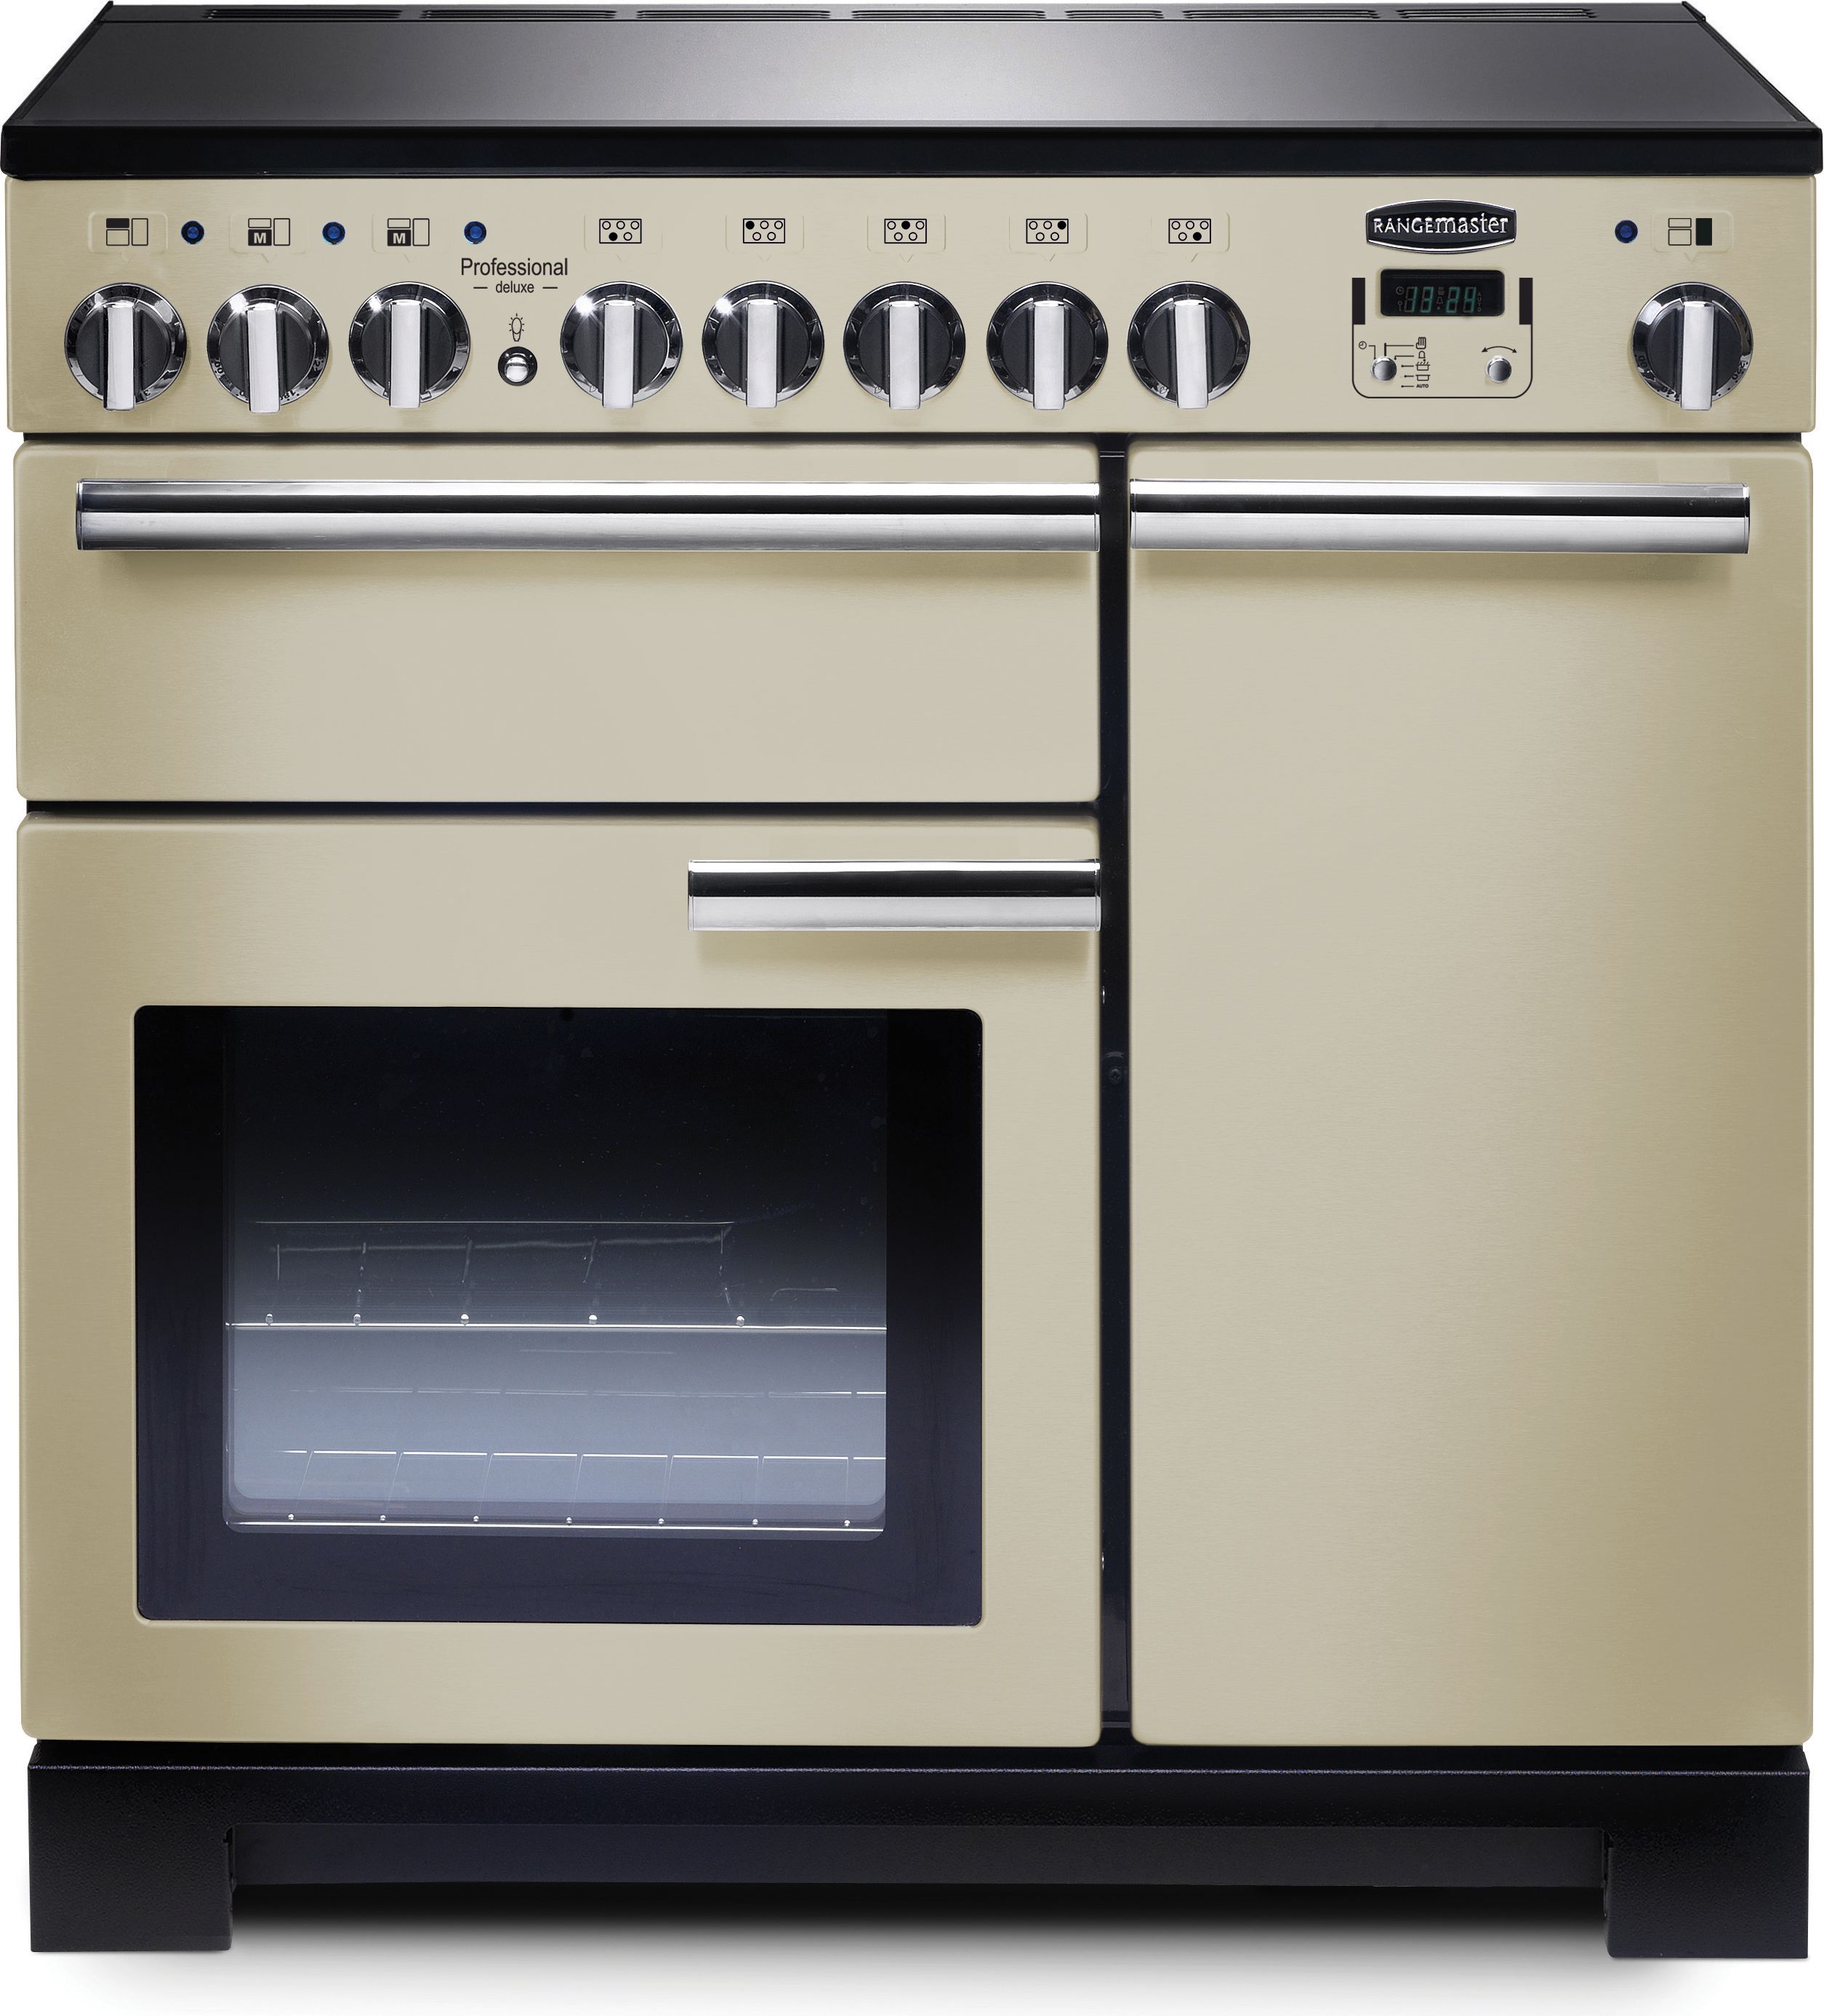 Rangemaster Professional Deluxe PDL90EICR/C 90cm Electric Range Cooker with Induction Hob - Cream / Chrome - A/A Rated, Cream